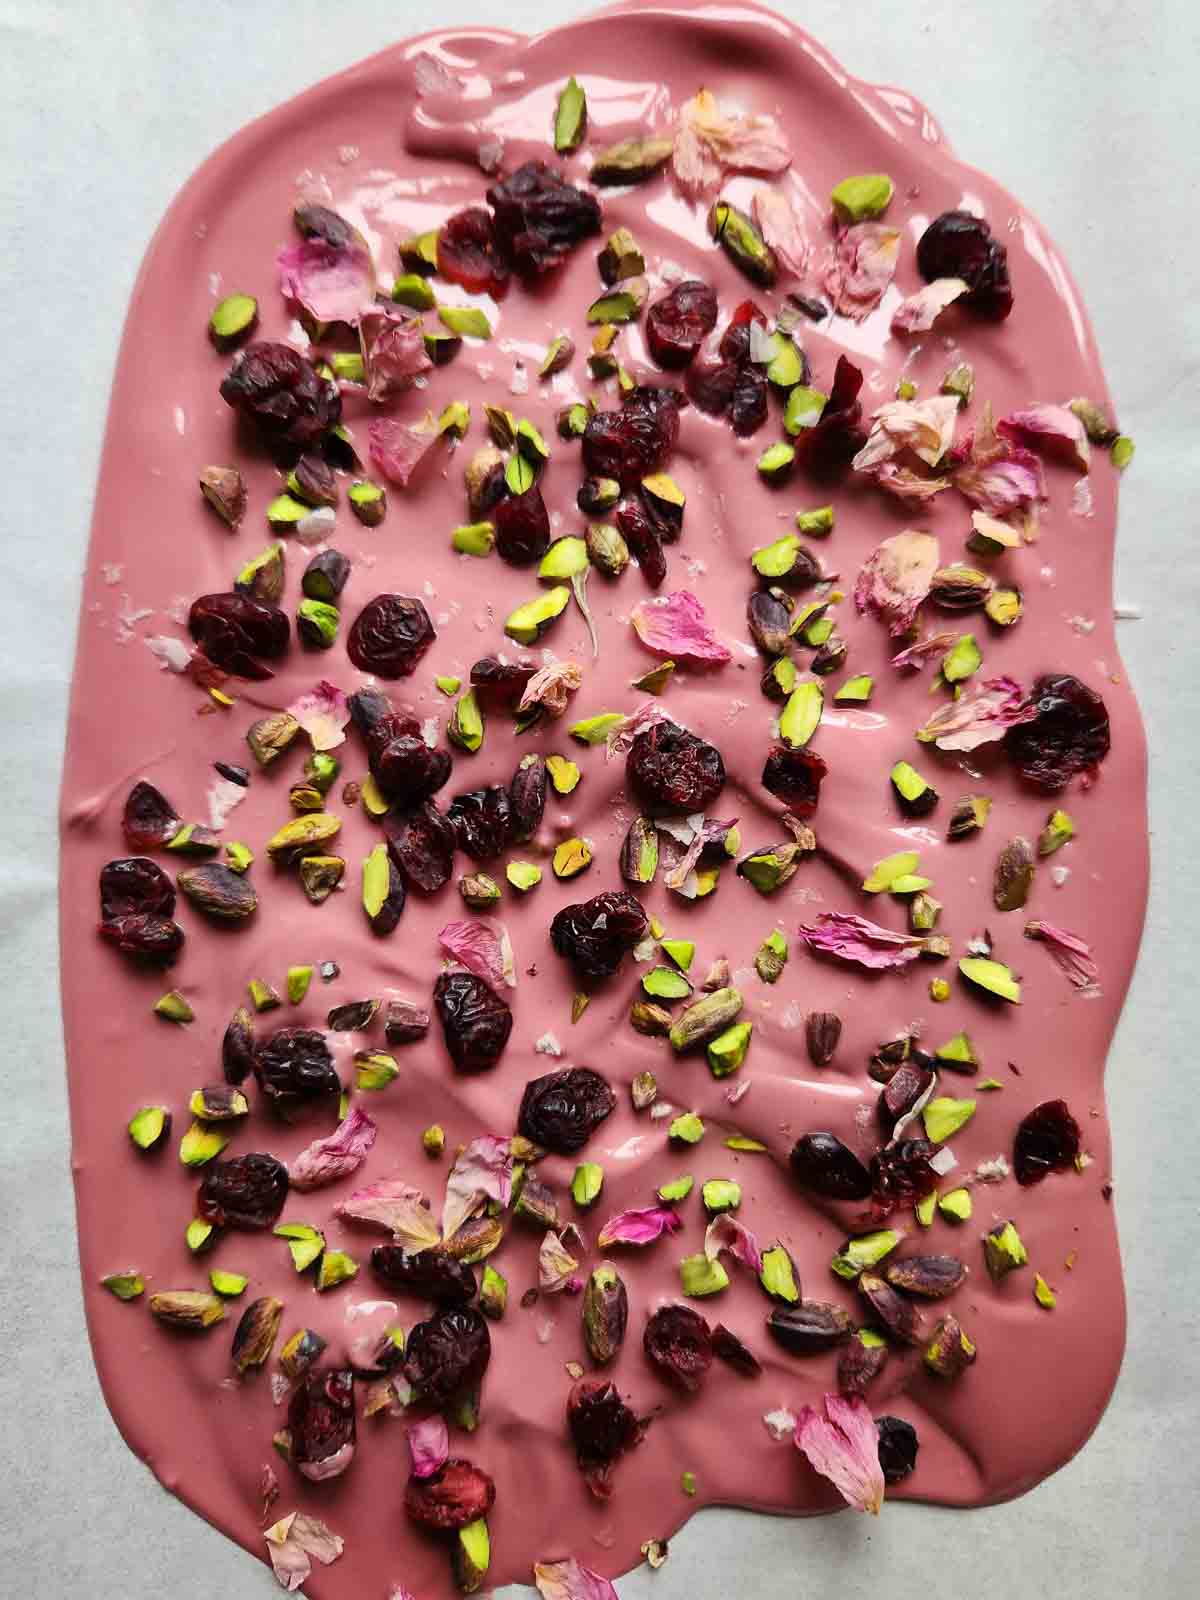 Melted ruby chocolate with toppings on parchment paper.